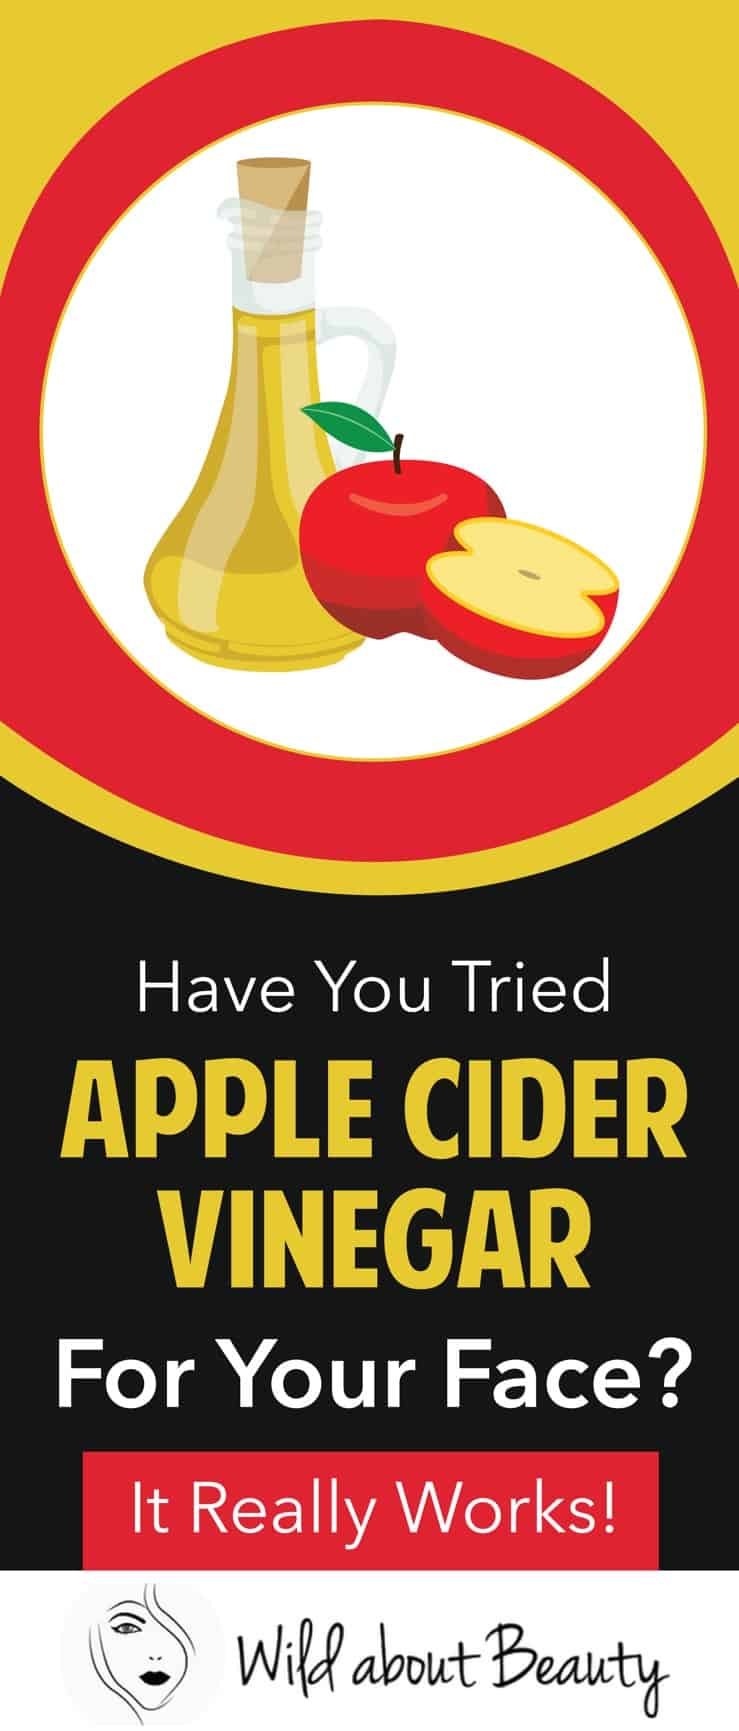 Have You Tried Apple Cider Vinegar for Your Face? It Really Works!